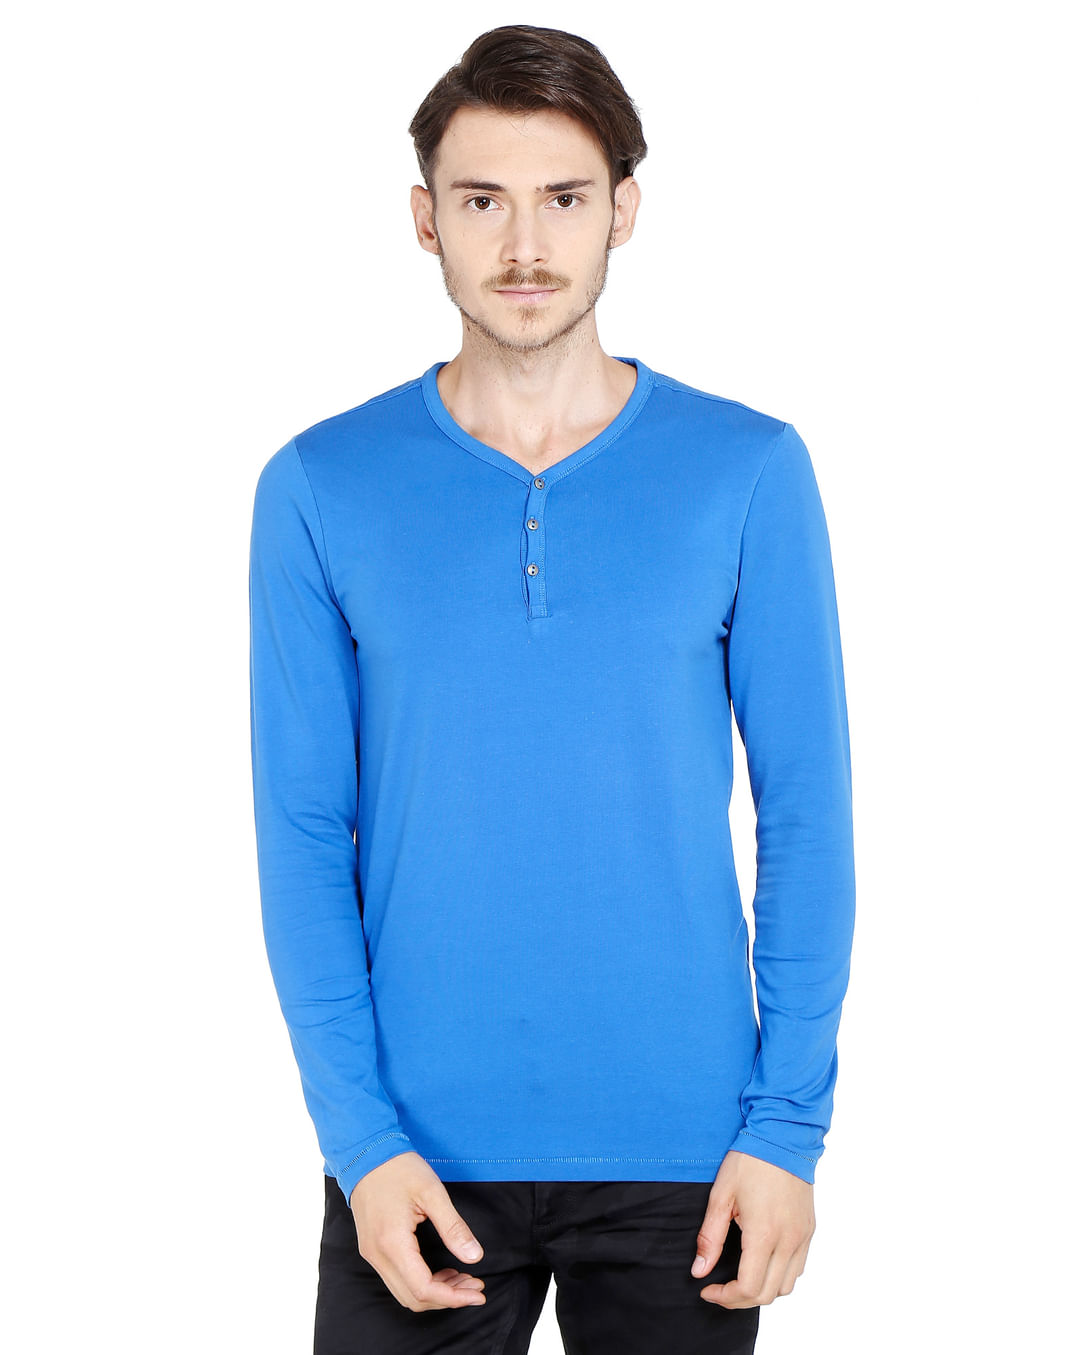 Buy Fit Henley T-Shirt Online India - Flat 50% Off